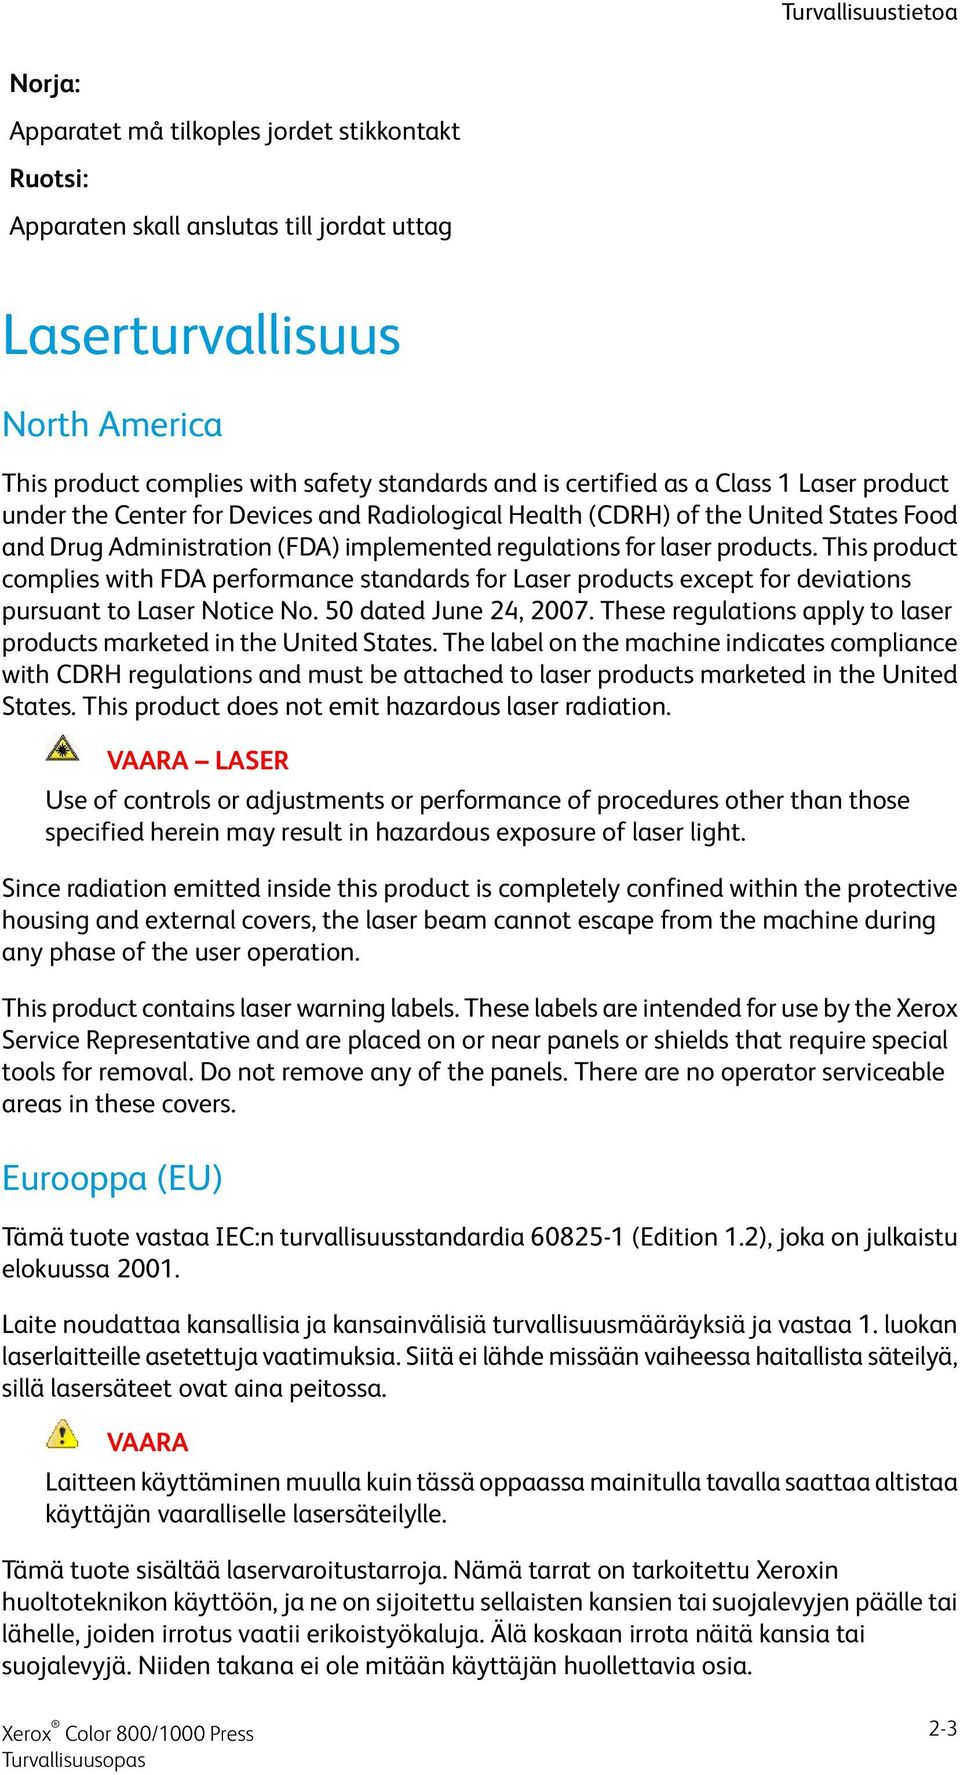 This product complies with FDA performance standards for Laser products except for deviations pursuant to Laser Notice No. 50 dated June 24, 2007.